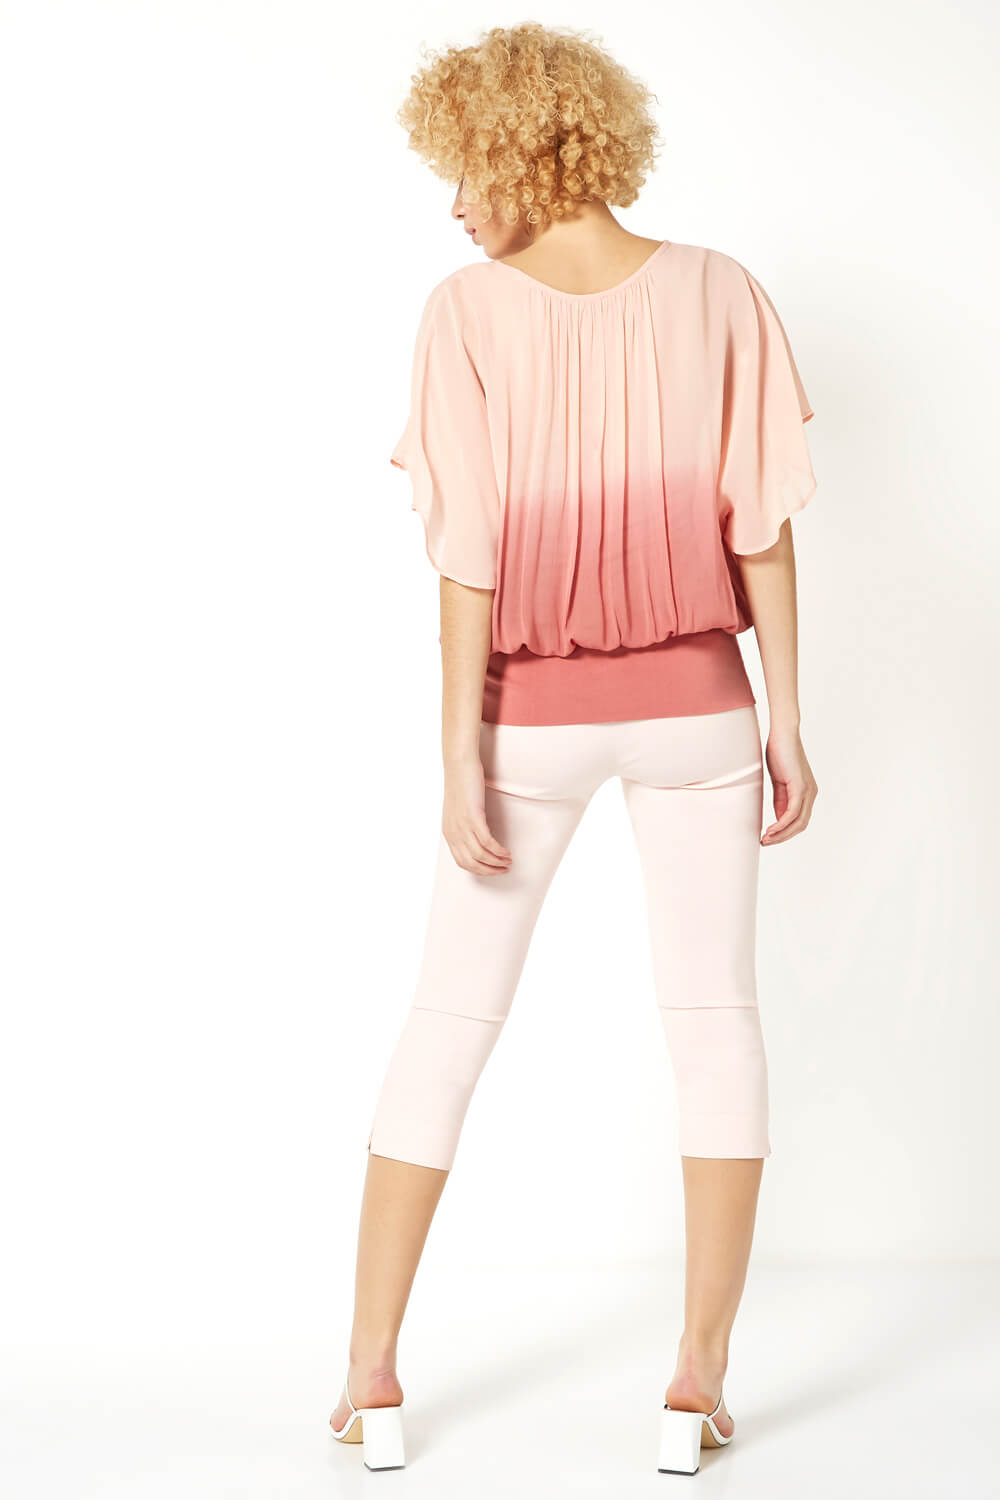 Light Pink Ombre Batwing Overlay Top, Image 3 of 5